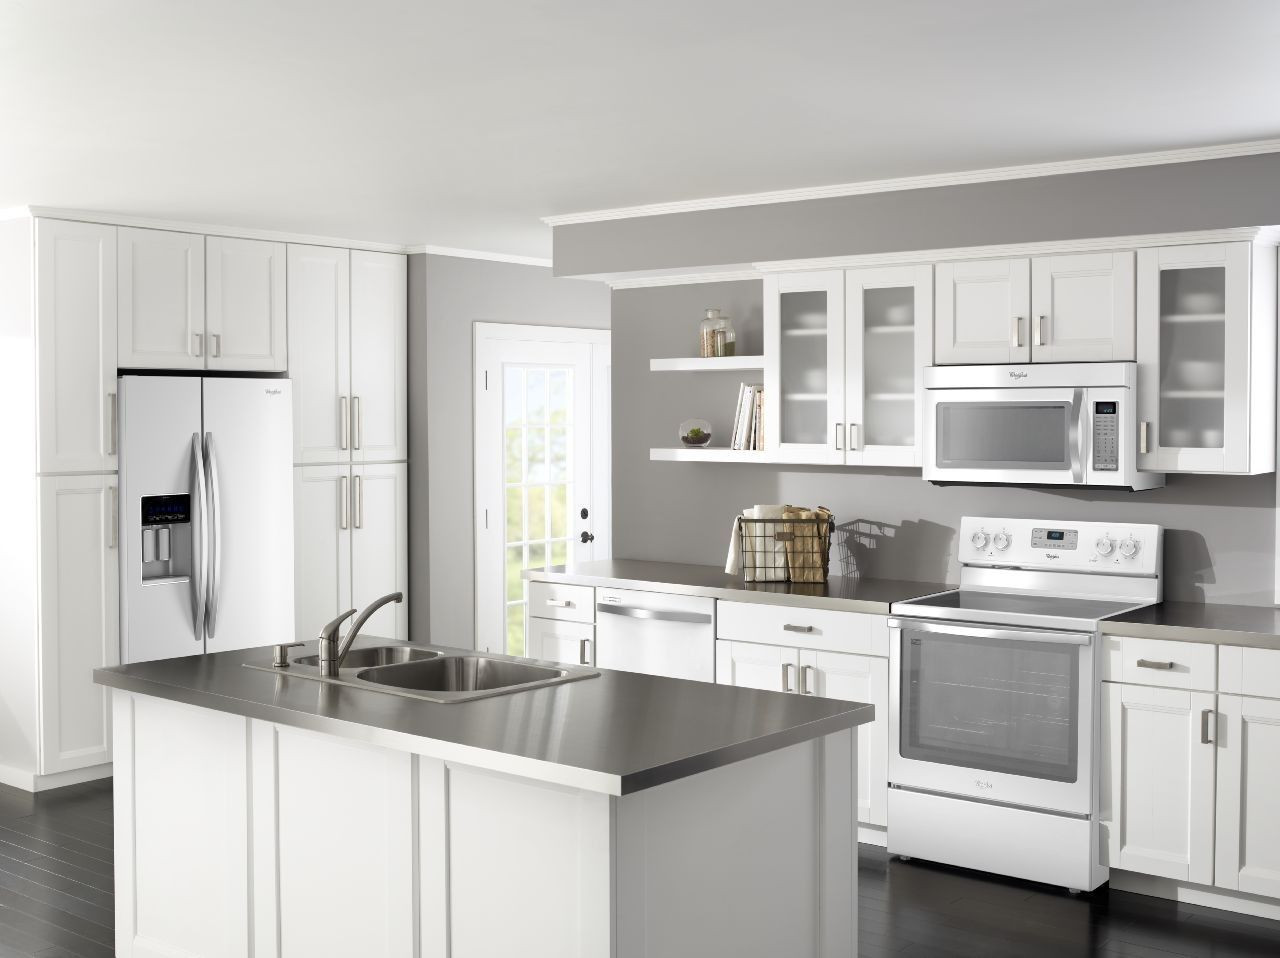 White Kitchen With White Appliances
 Best Kitchen Appliance Finishes For 2019